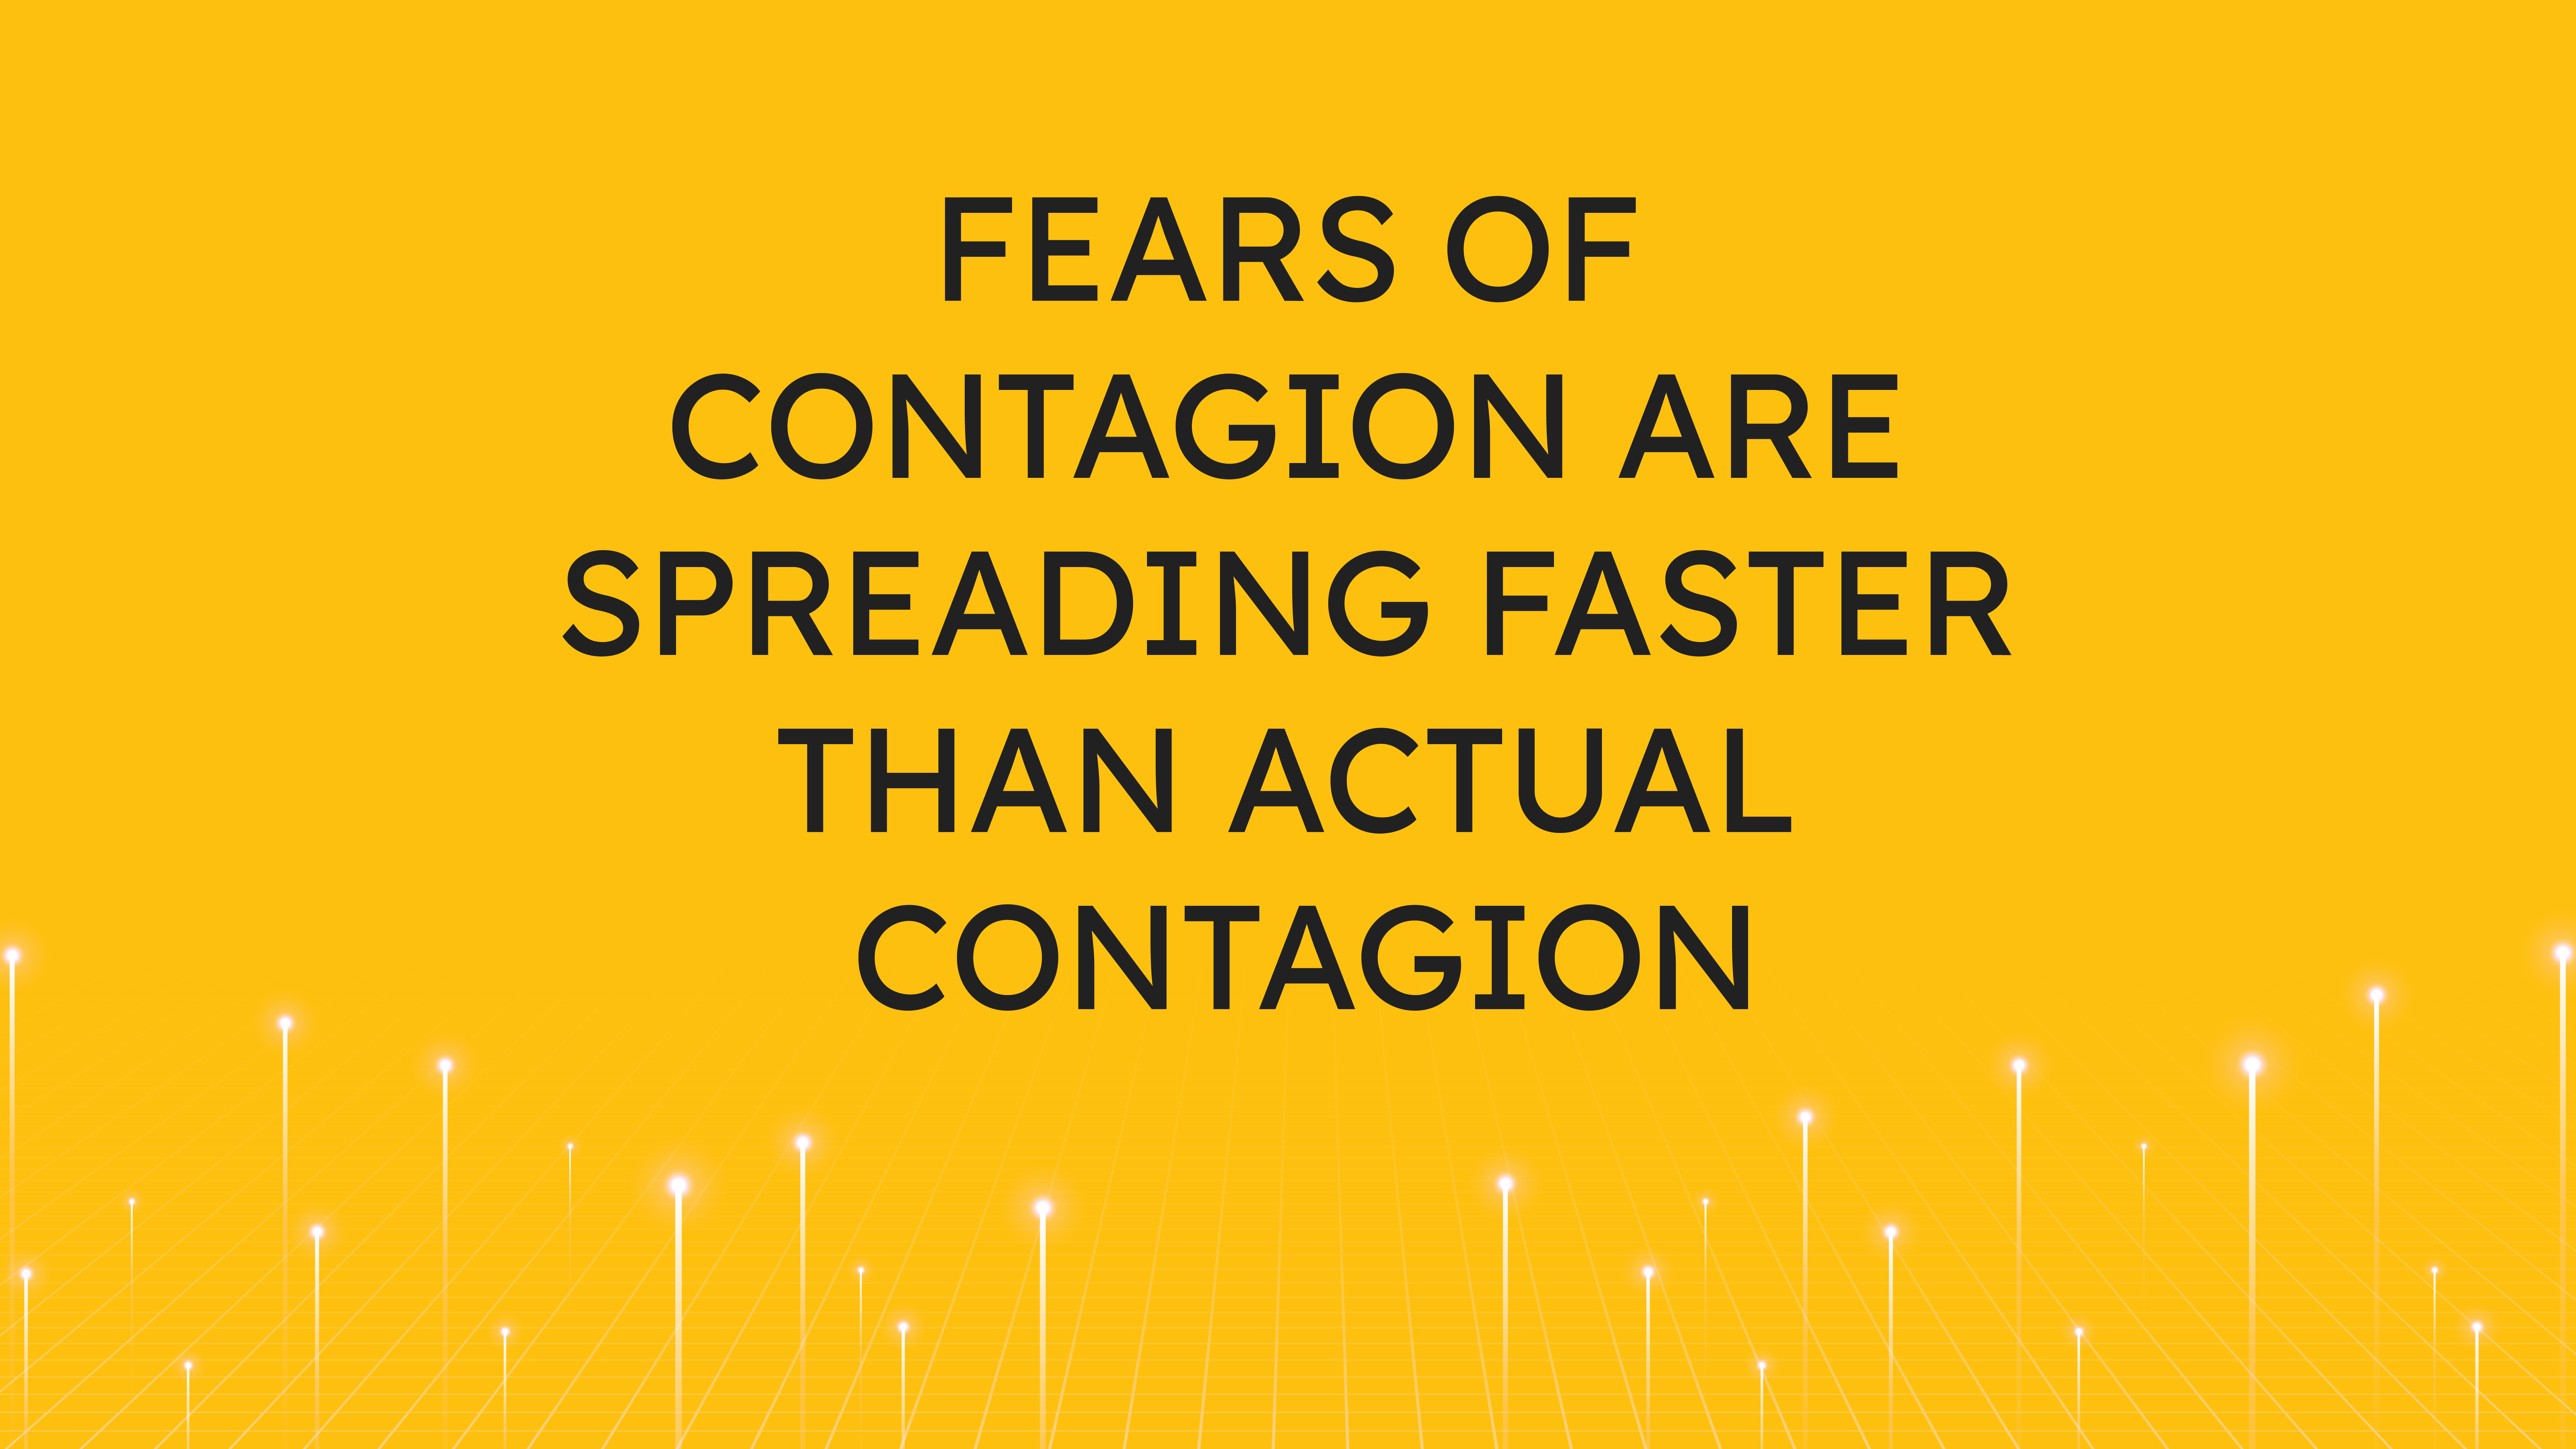 Fears of Contagion are Spreading Faster  than Actual Contagion